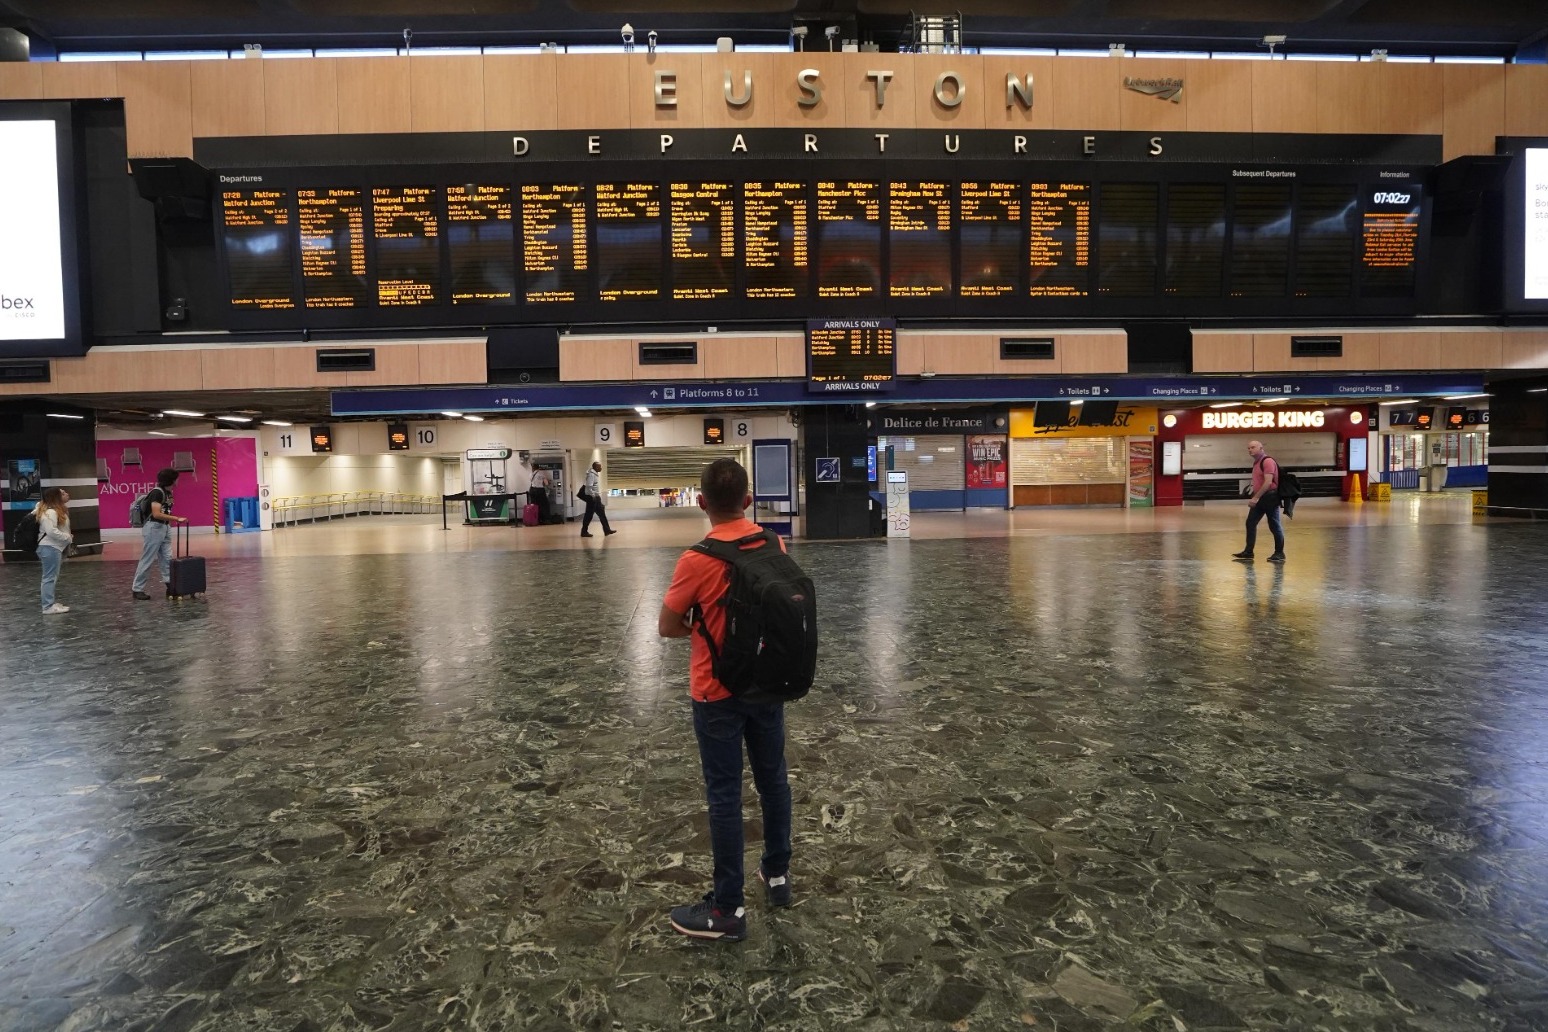 Stations deserted as start of rail strike means no early morning trains